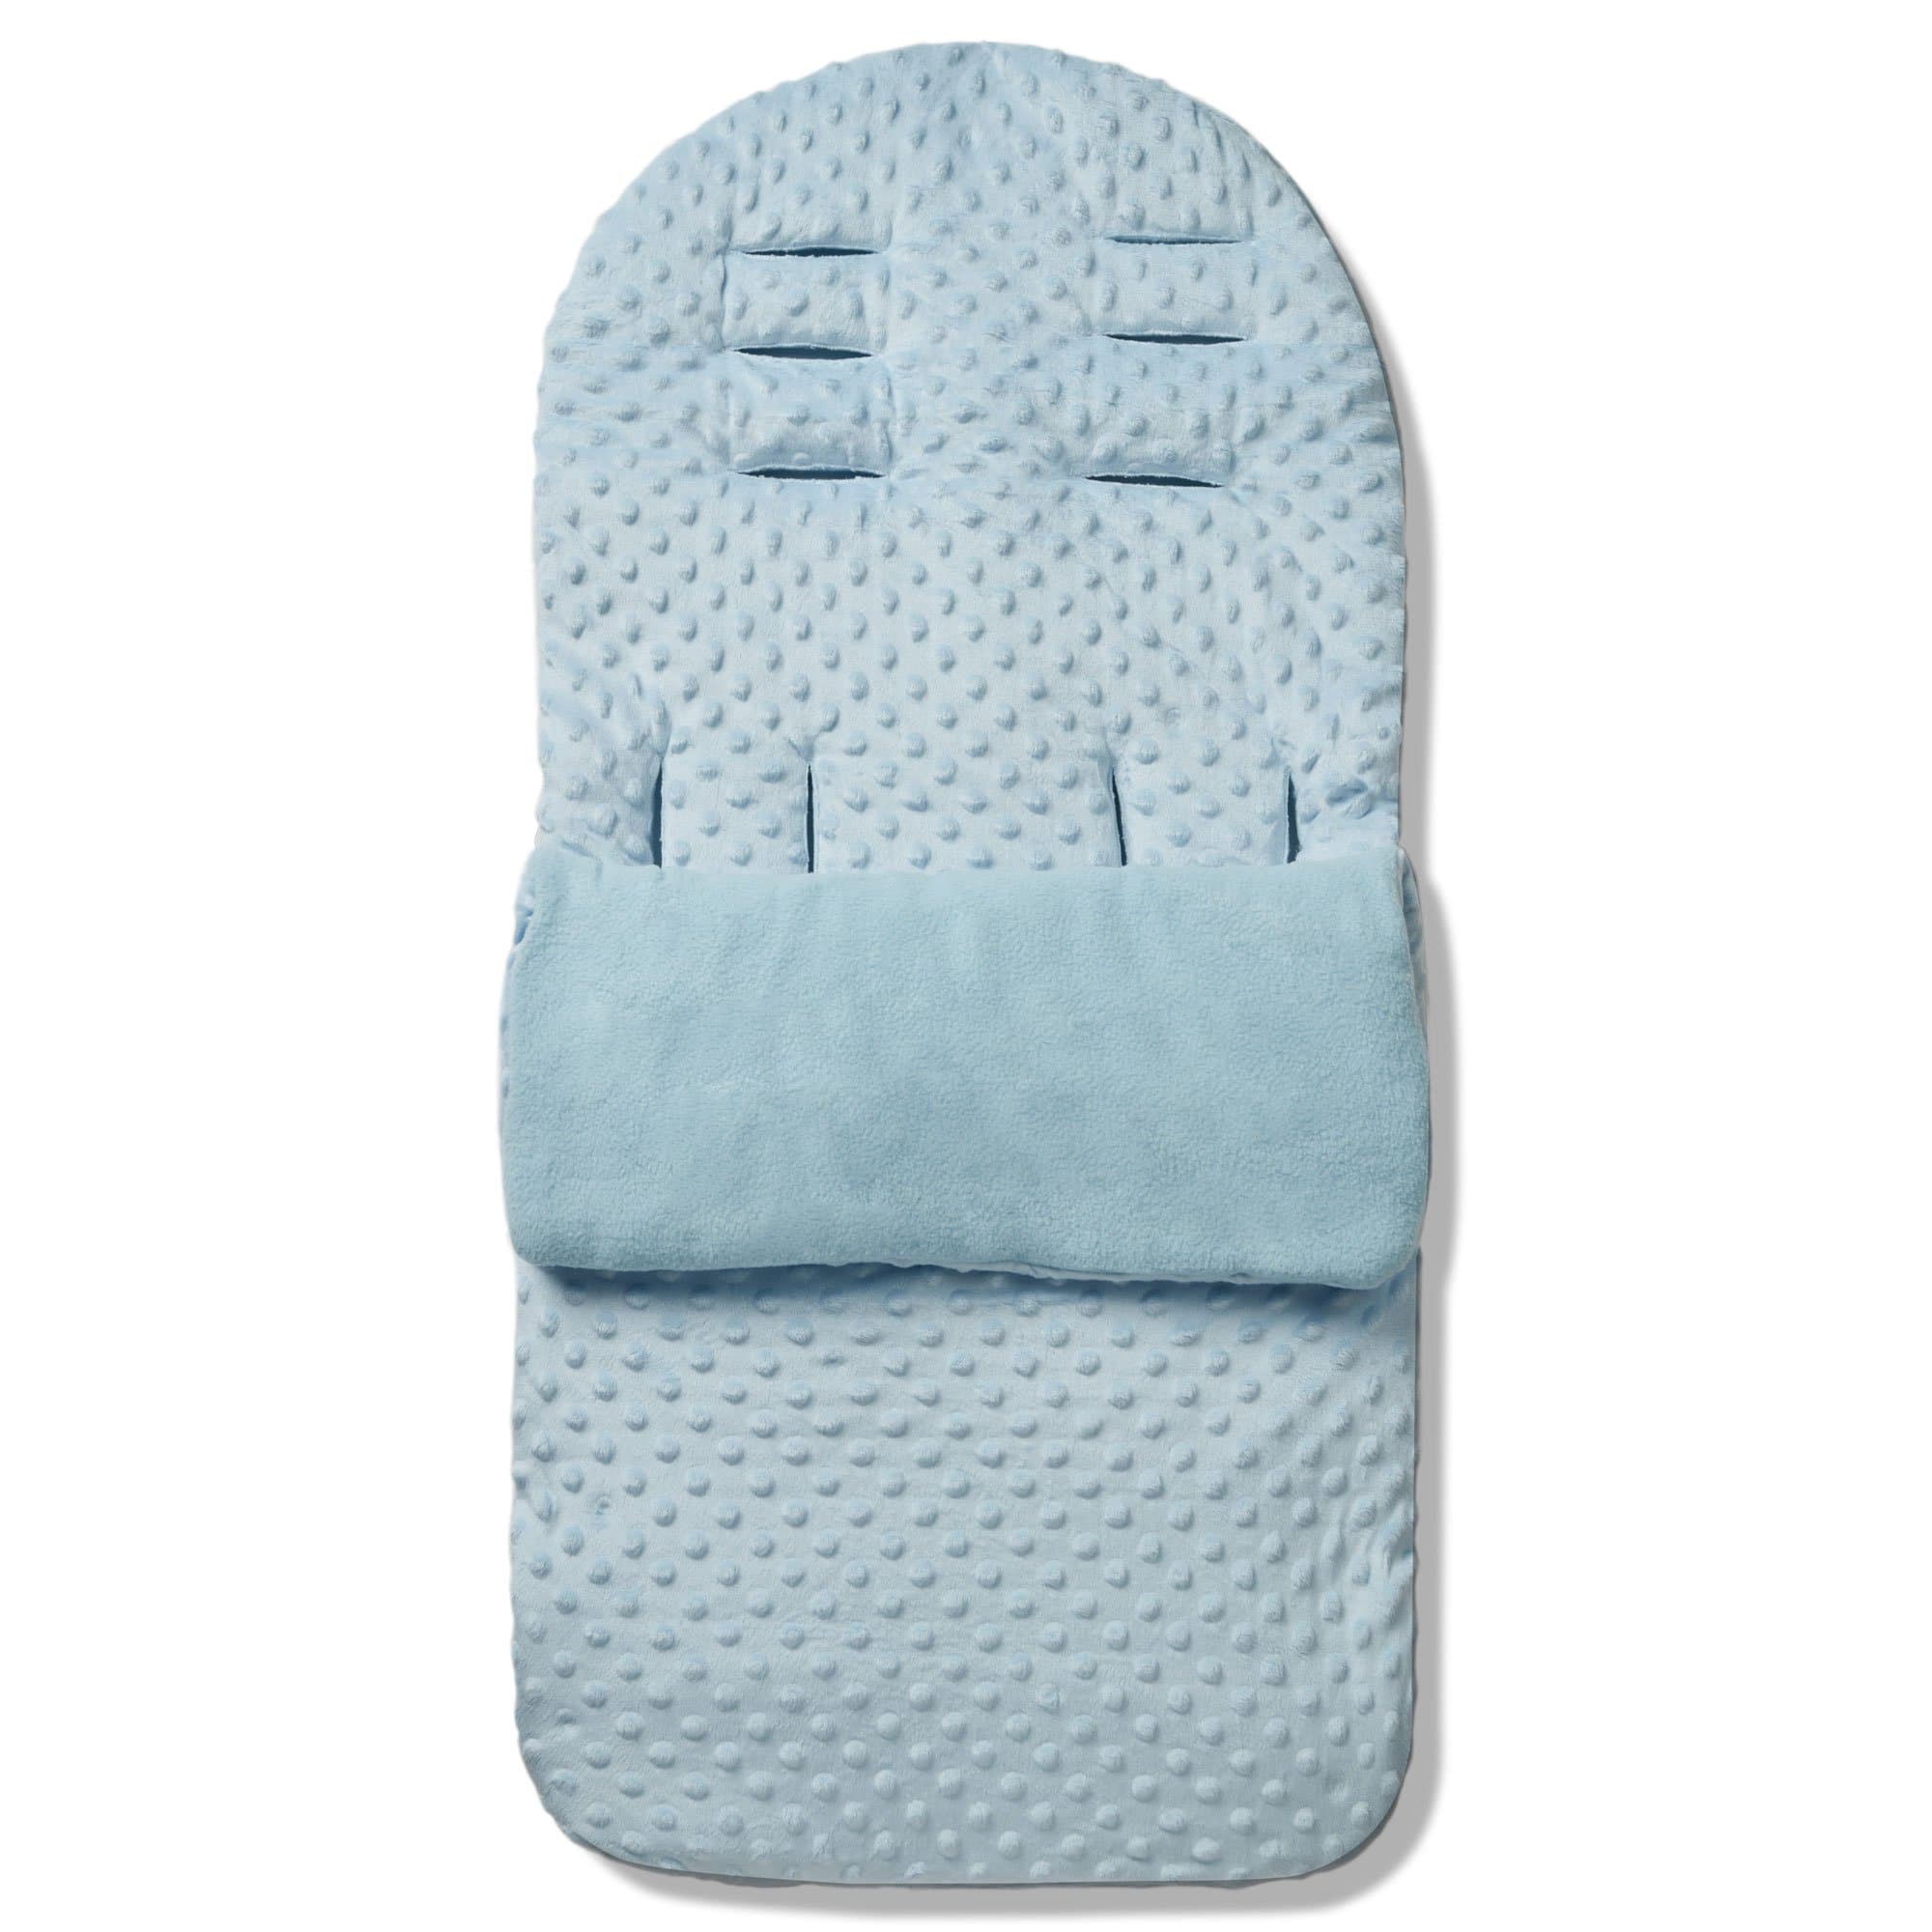 Universal Dimple Footmuff / Cosy Toes - Fits All Pushchairs / Prams & Buggies - Blue / Fits All Models | For Your Little One